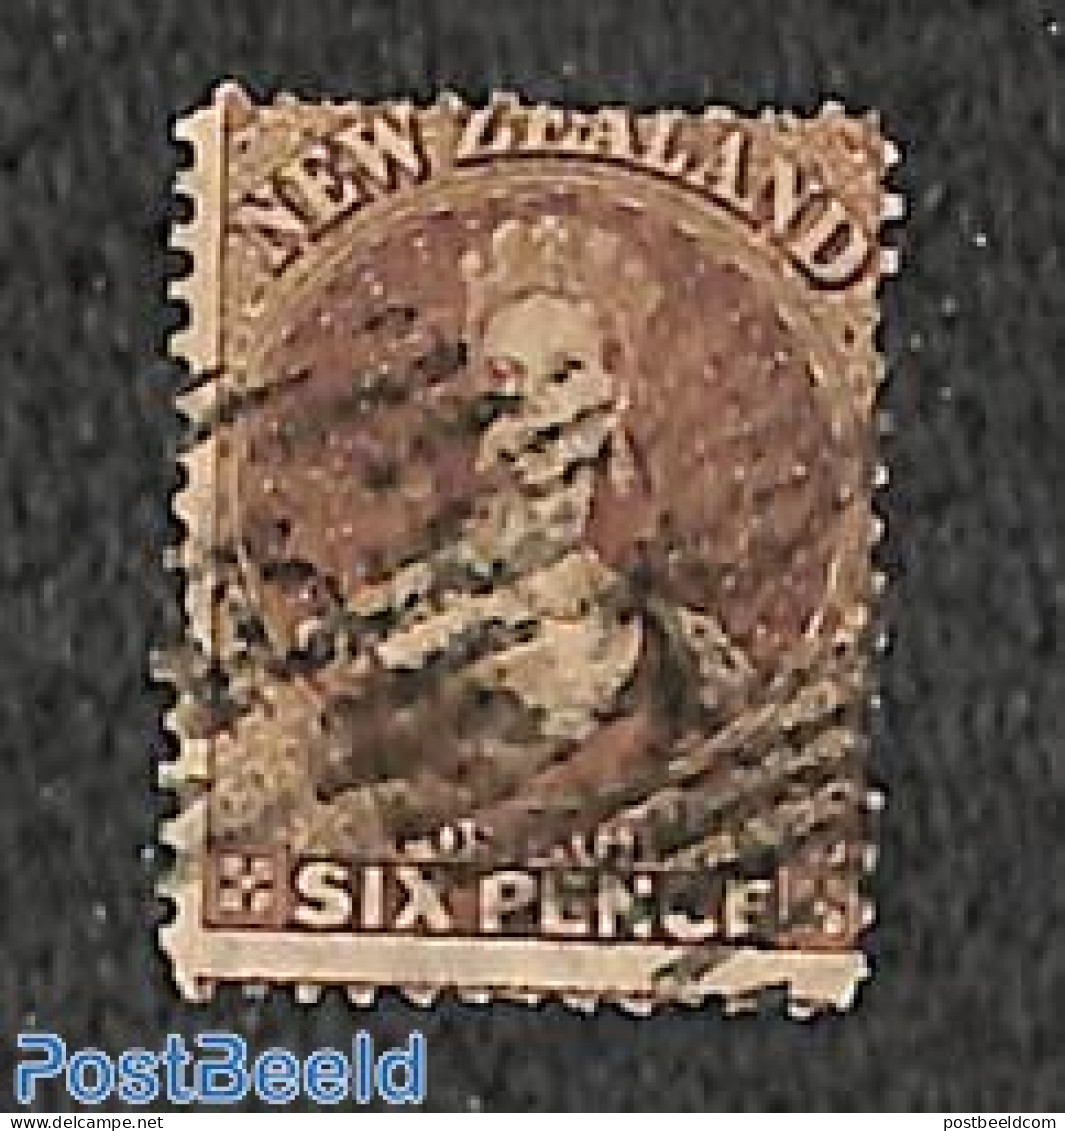 New Zealand 1864 Six Pence, Used, Used Stamps - Usati